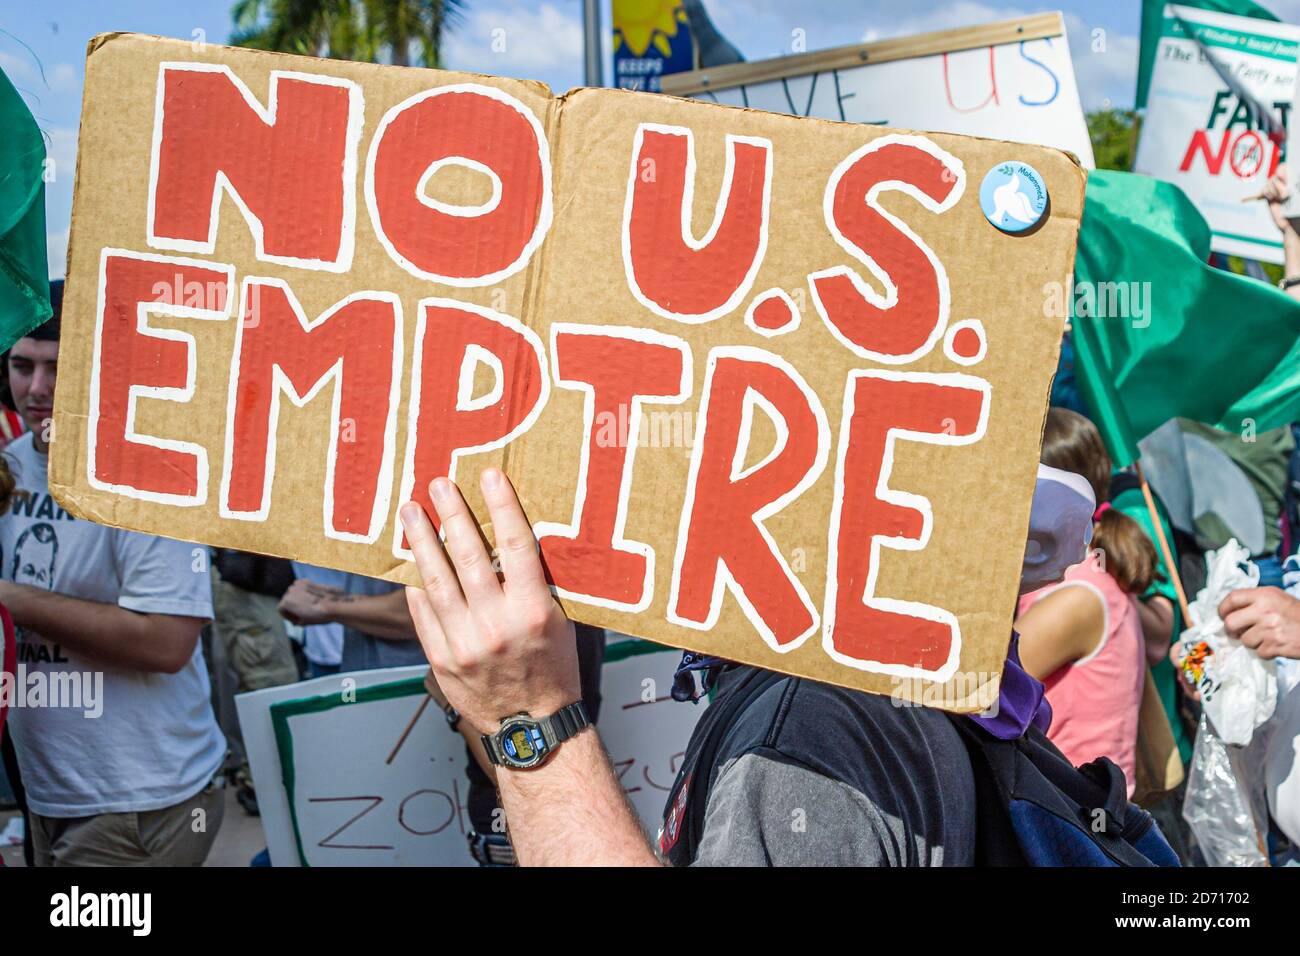 Miami Florida,Biscayne Boulevard,Free Trade Area of Americans Summit FTAA demonstrations,protester holds holding sign poster, Stock Photo